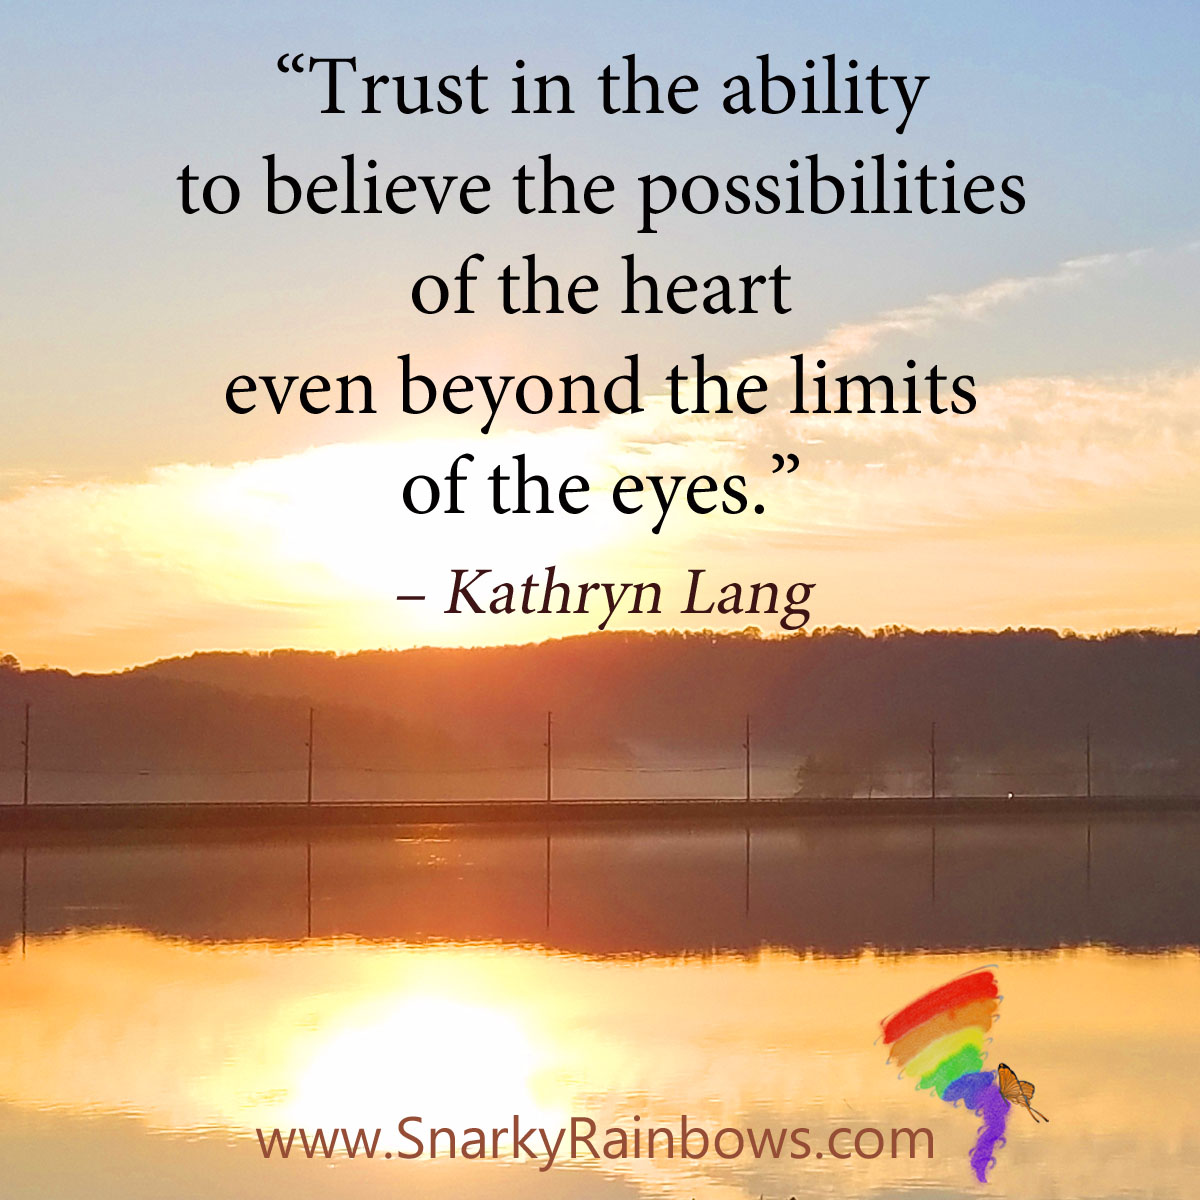 #QuoteofotheDay - beyond the limits of the eyes